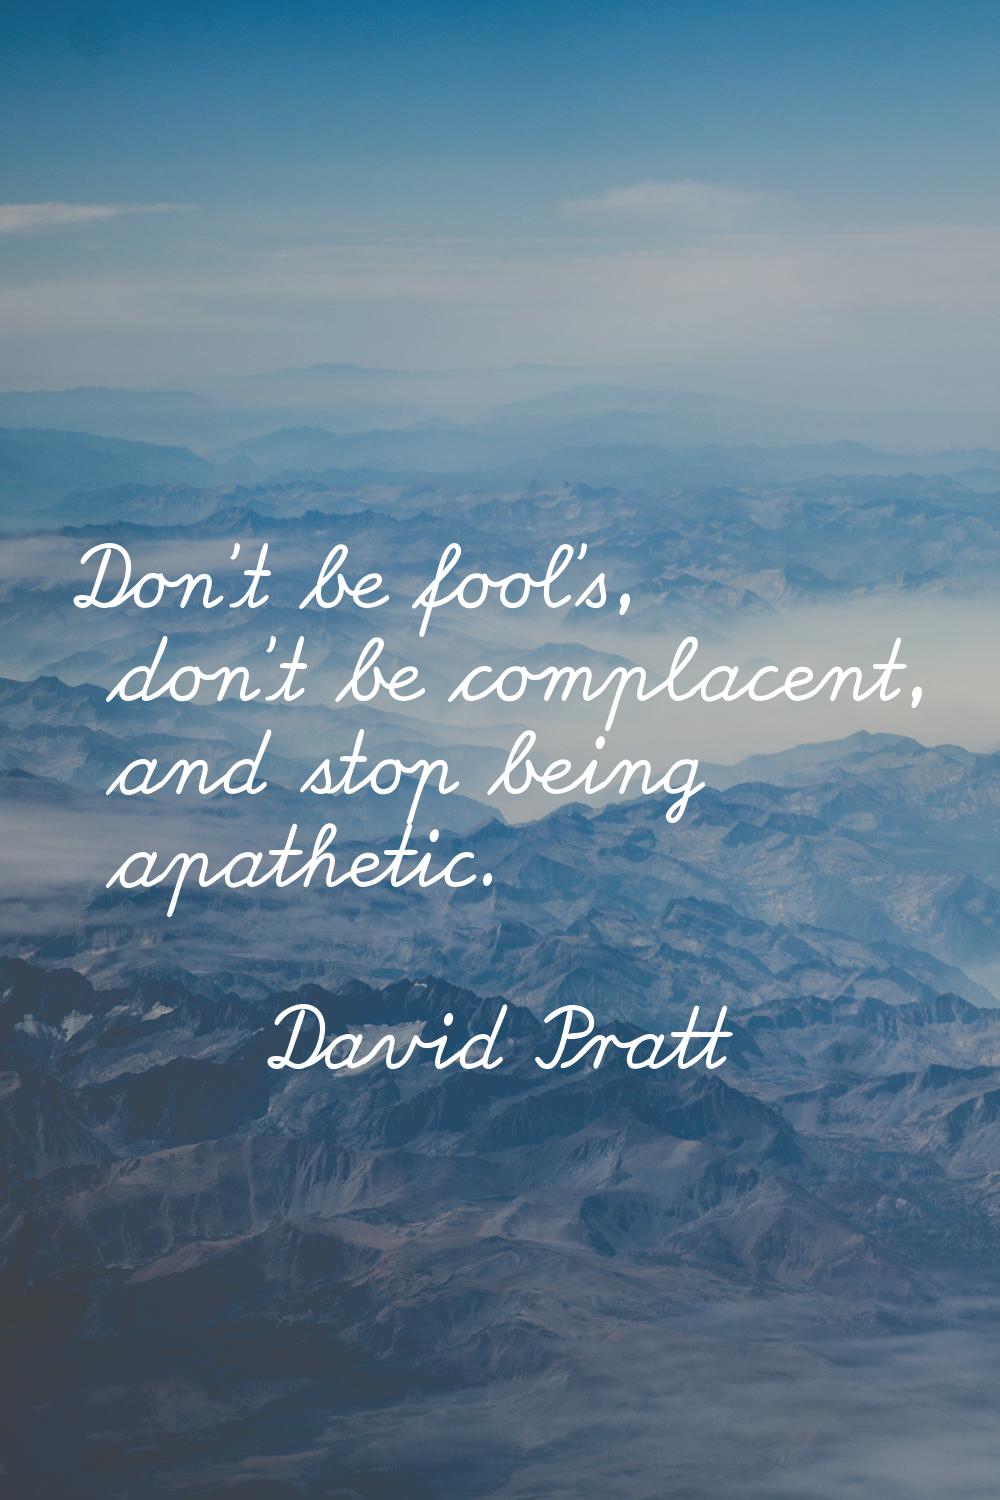 Don't be fool's, don't be complacent, and stop being apathetic.